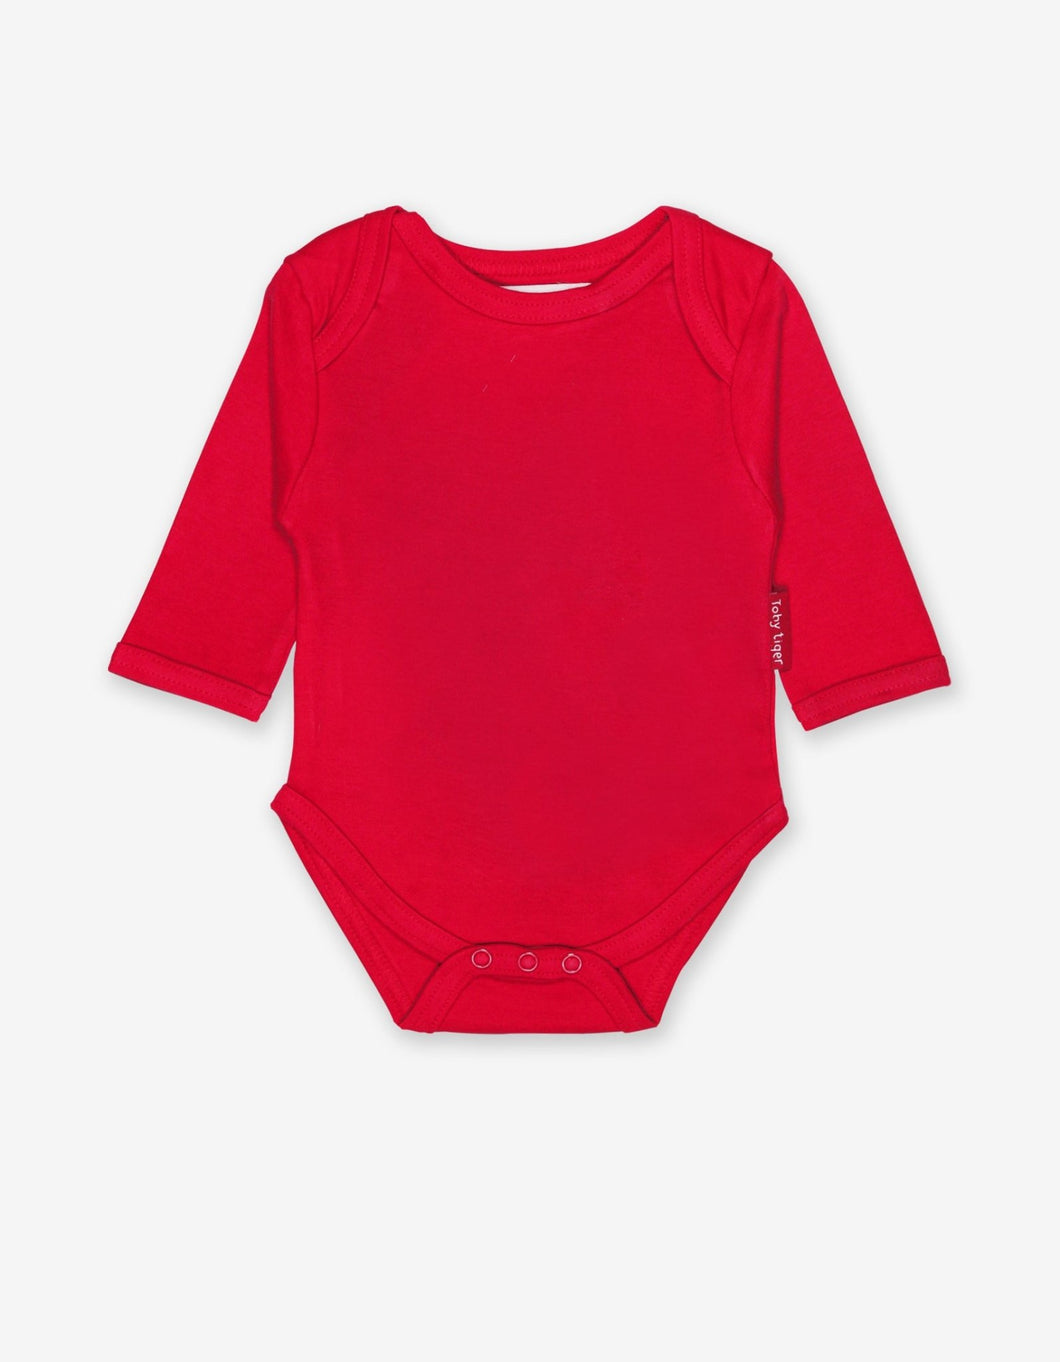 Organic Red Basic Long-Sleeved Baby Body - Toby Tiger